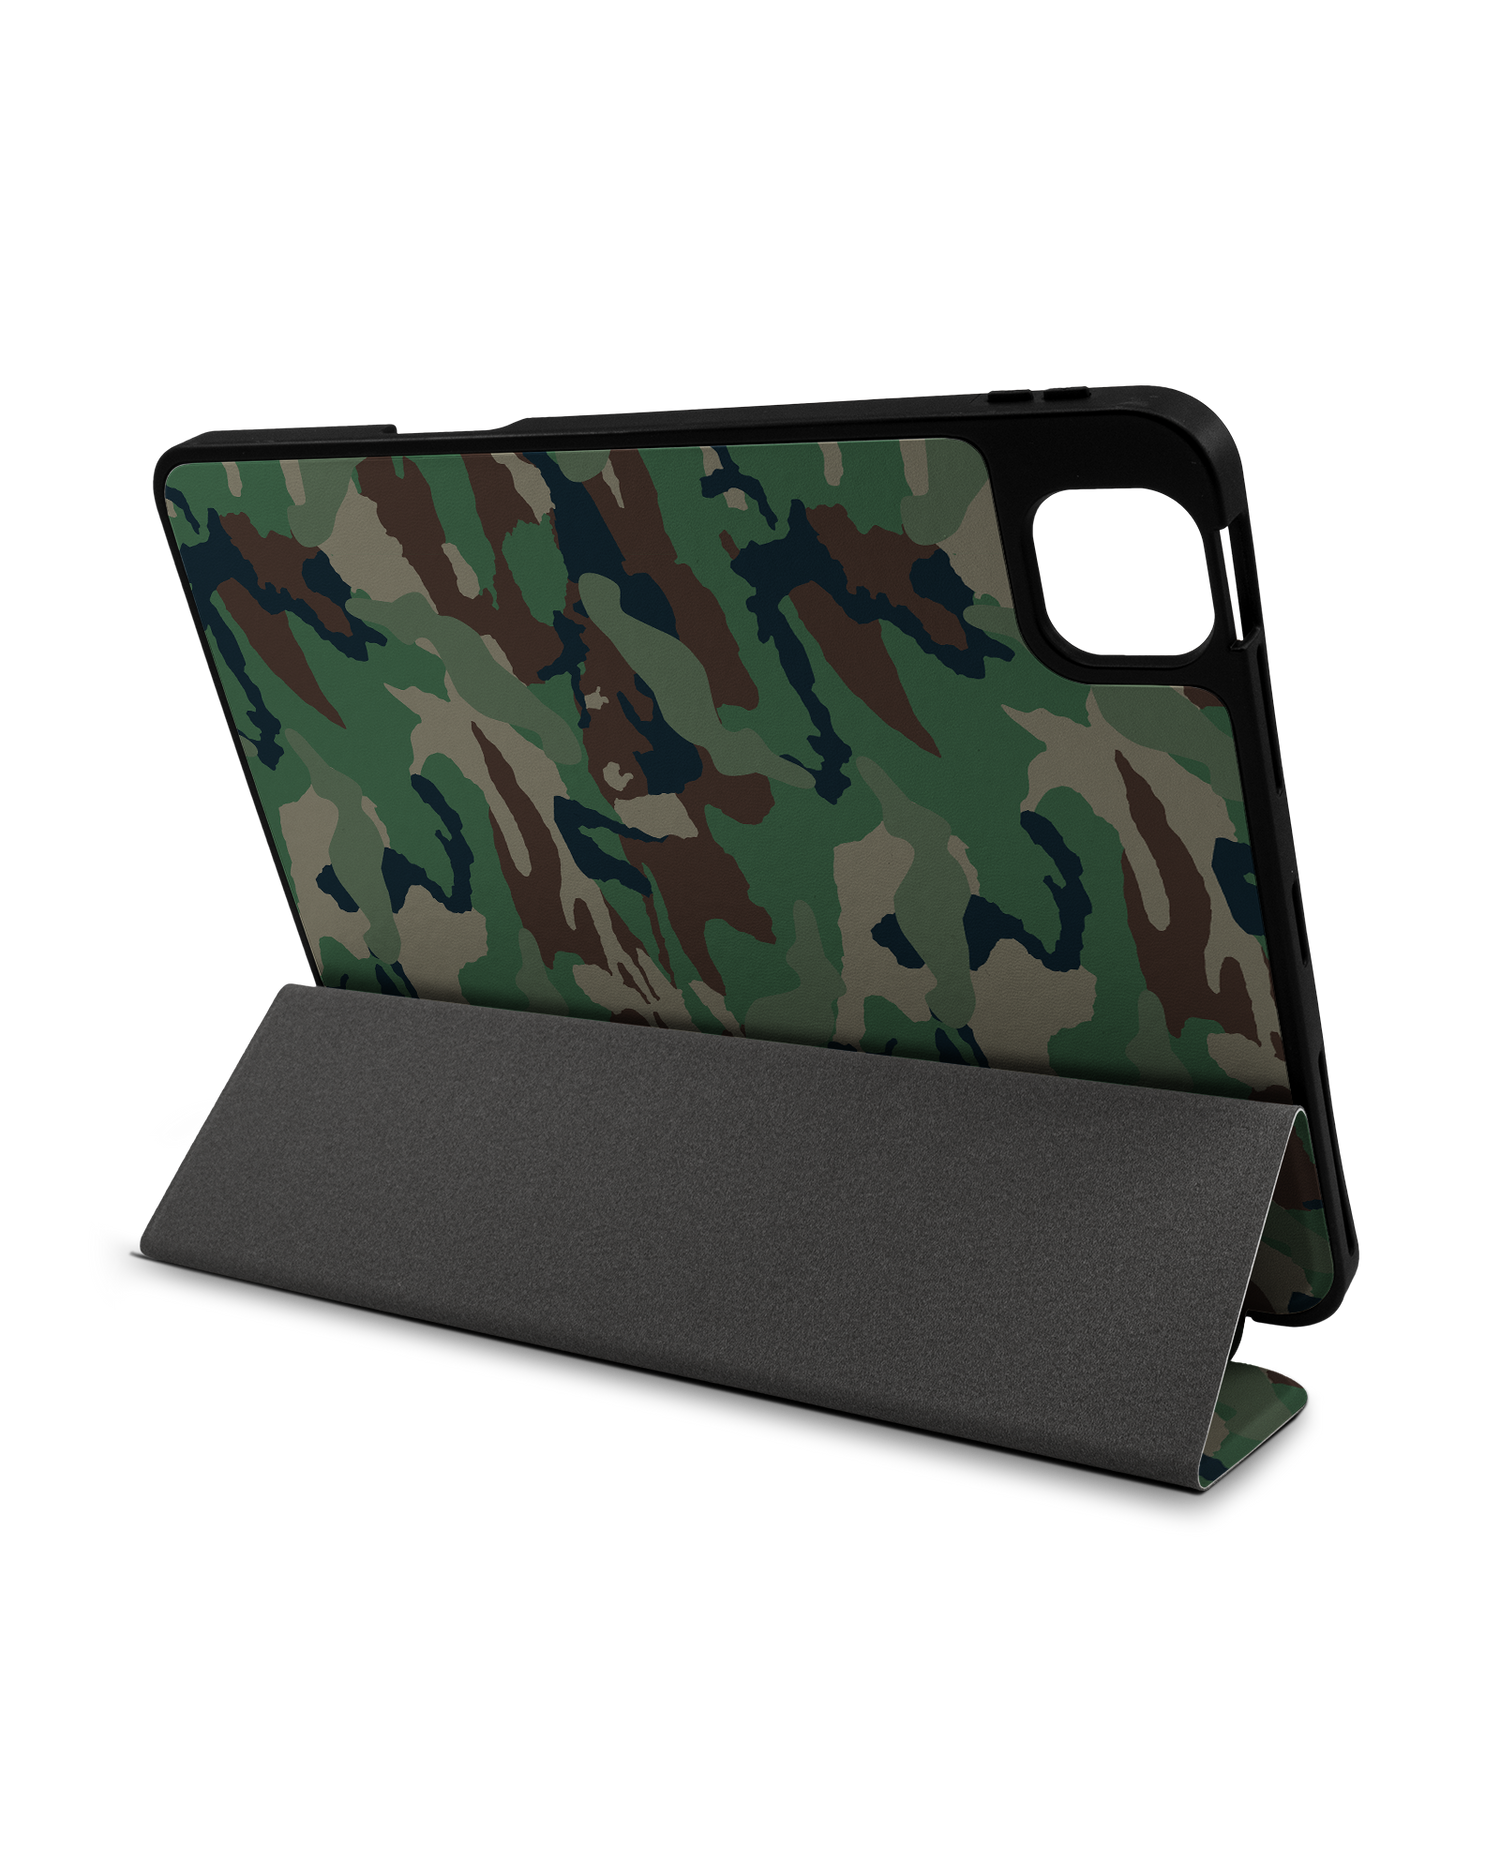 Green and Brown Camo iPad Case with Pencil Holder Apple iPad Pro 11